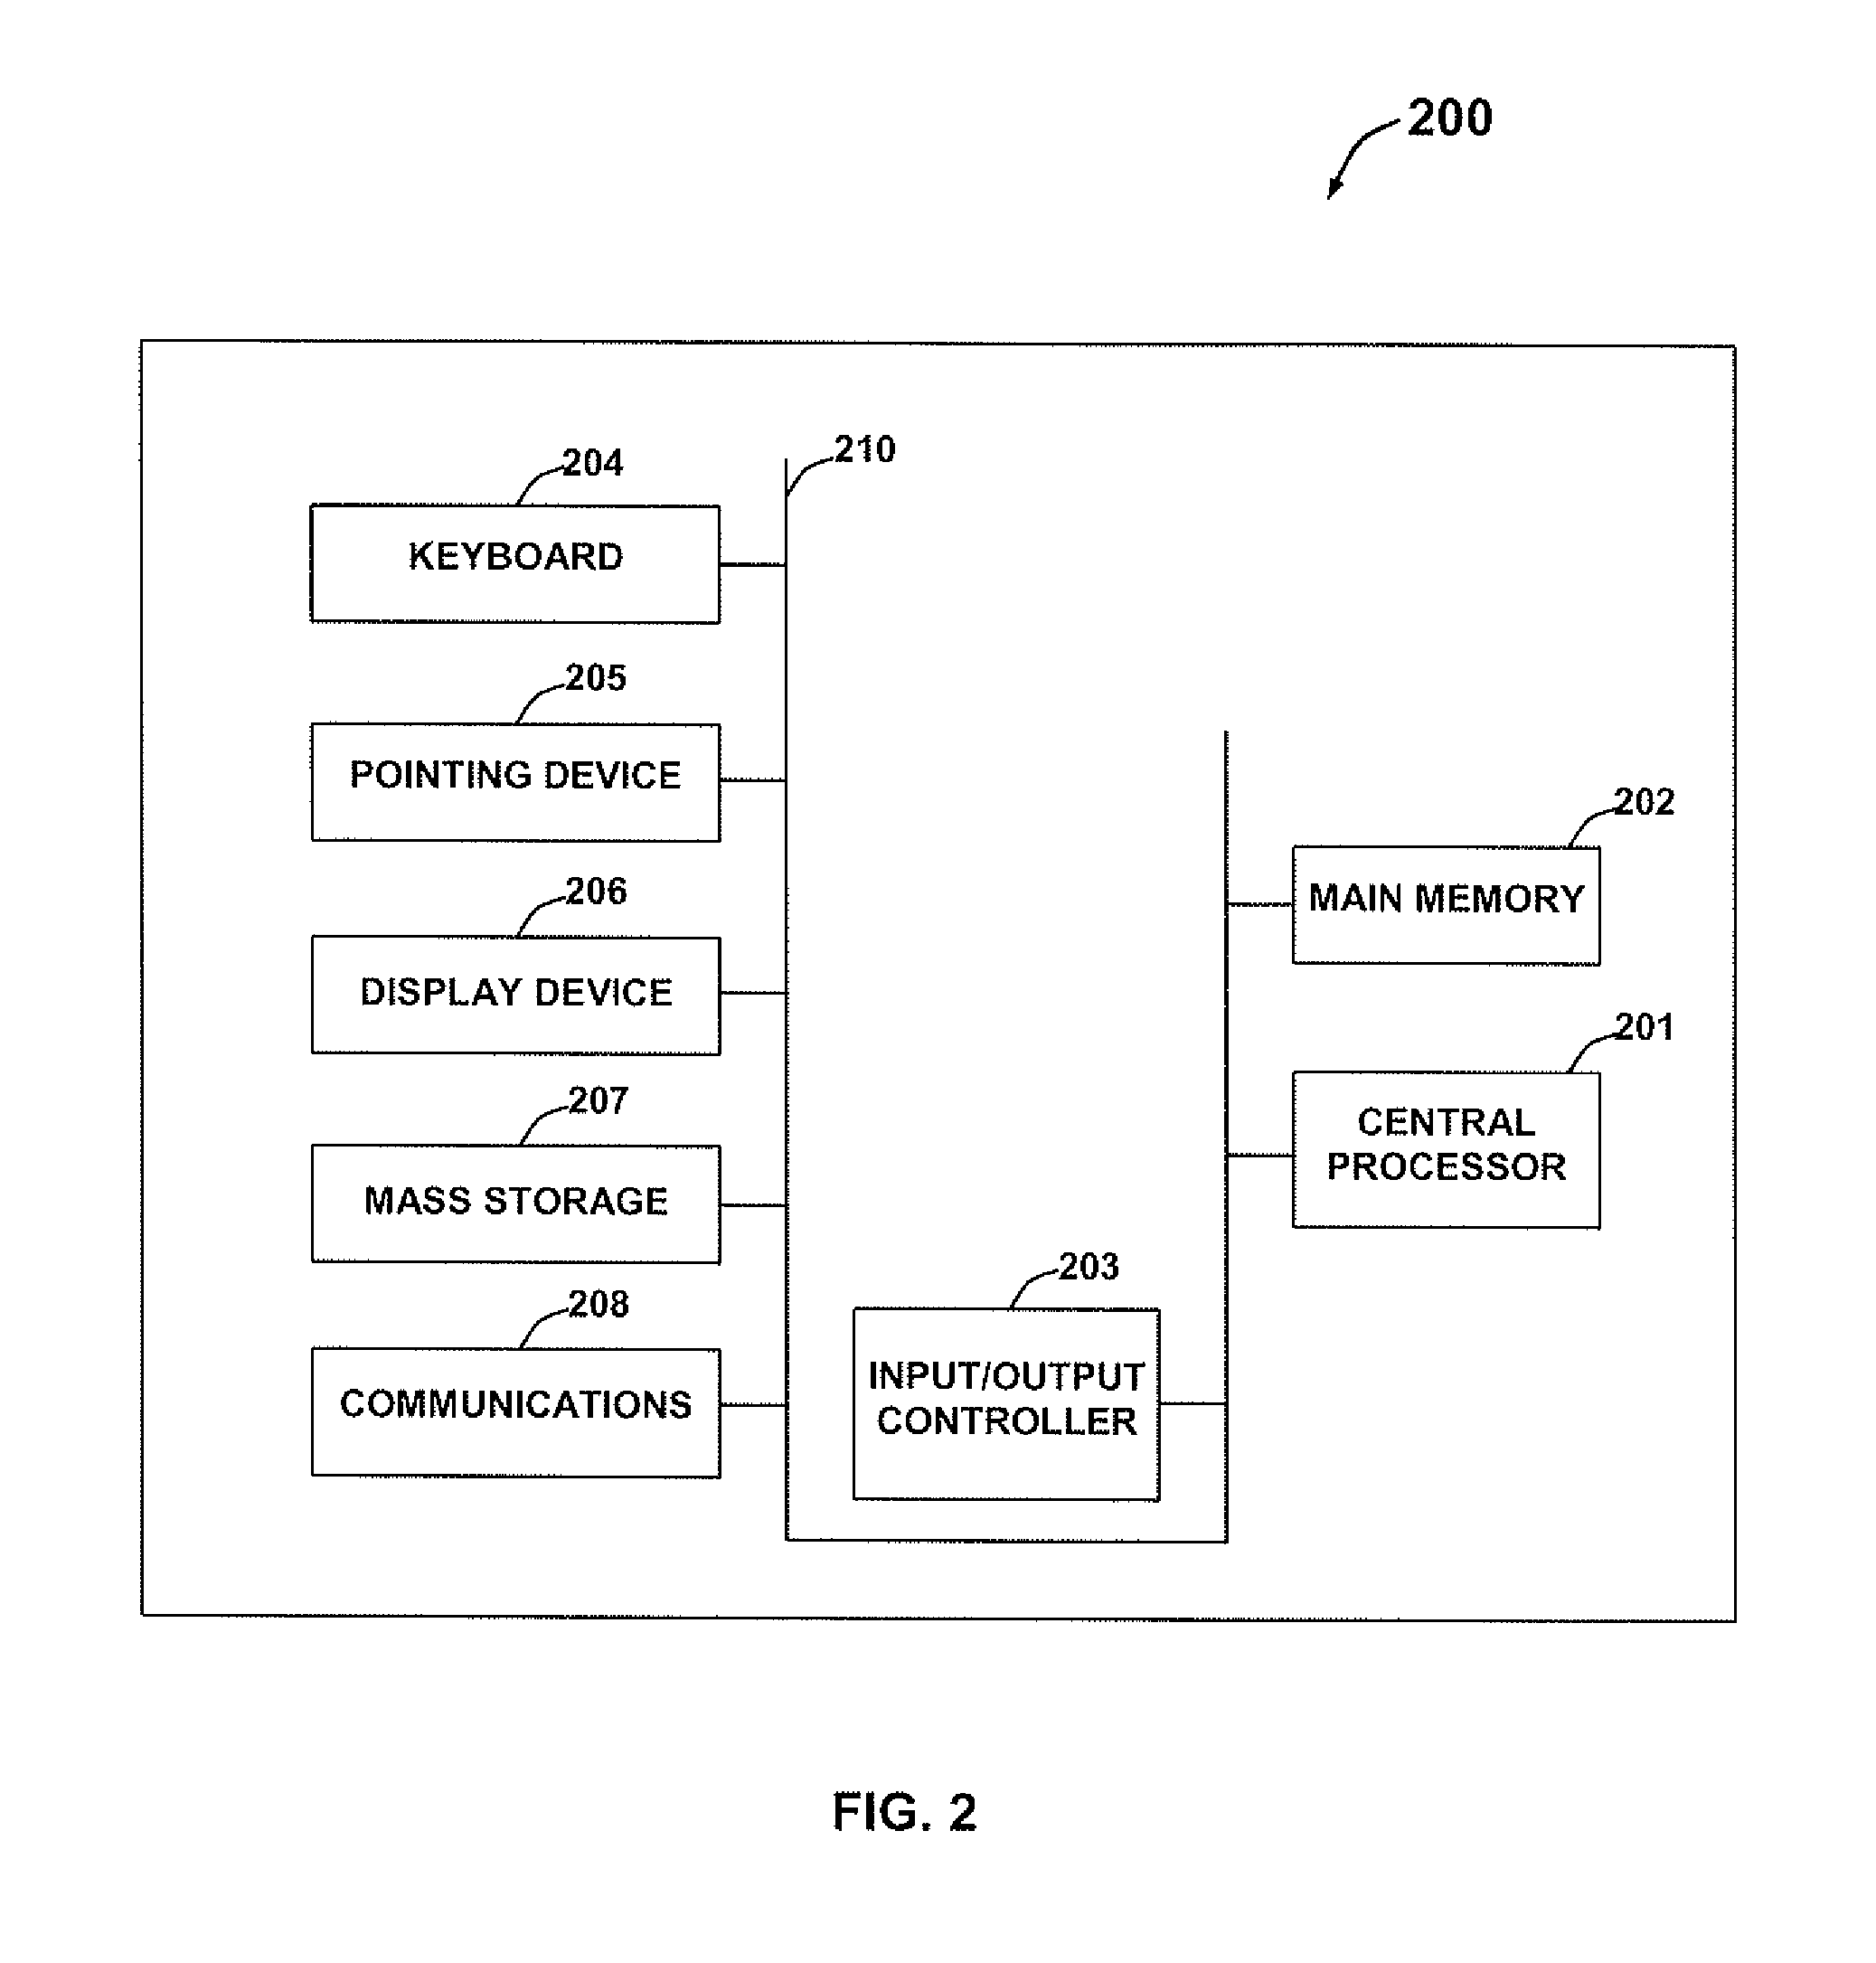 Driver authentication system and method for monitoring and controlling vehicle usage